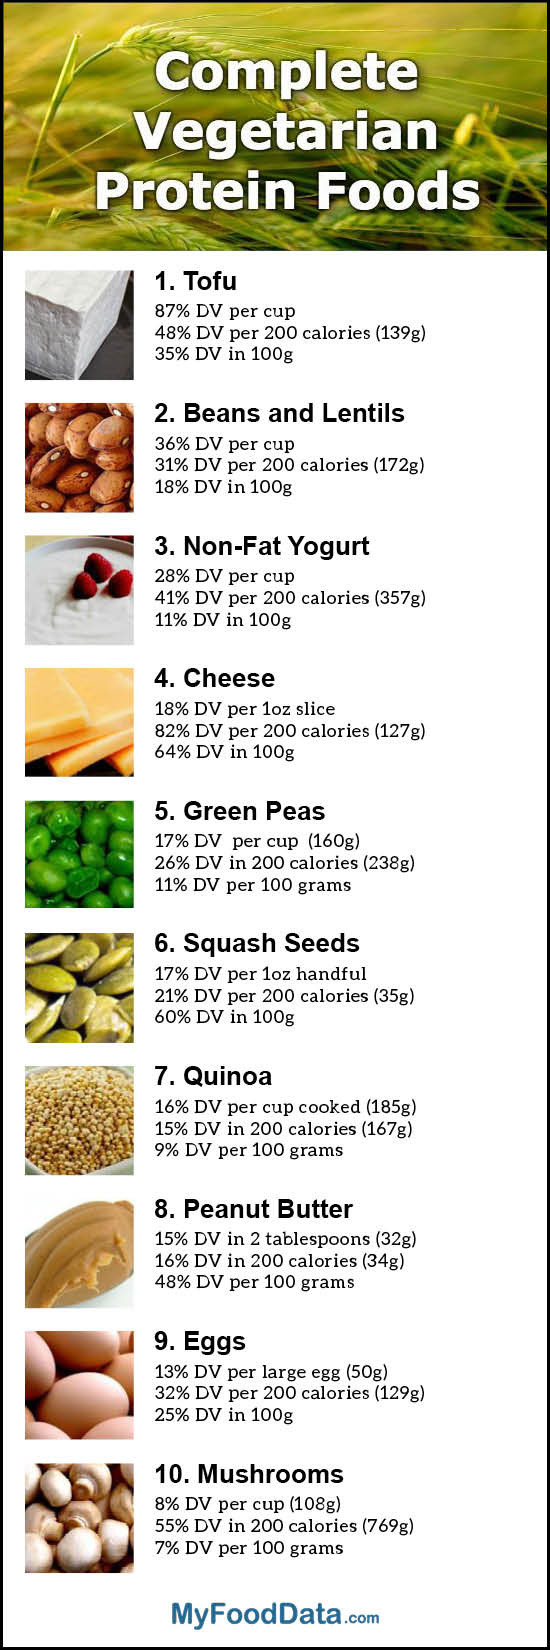 Protein Vegetarian Diets
 Top 10 plete Ve arian Protein Foods with All the